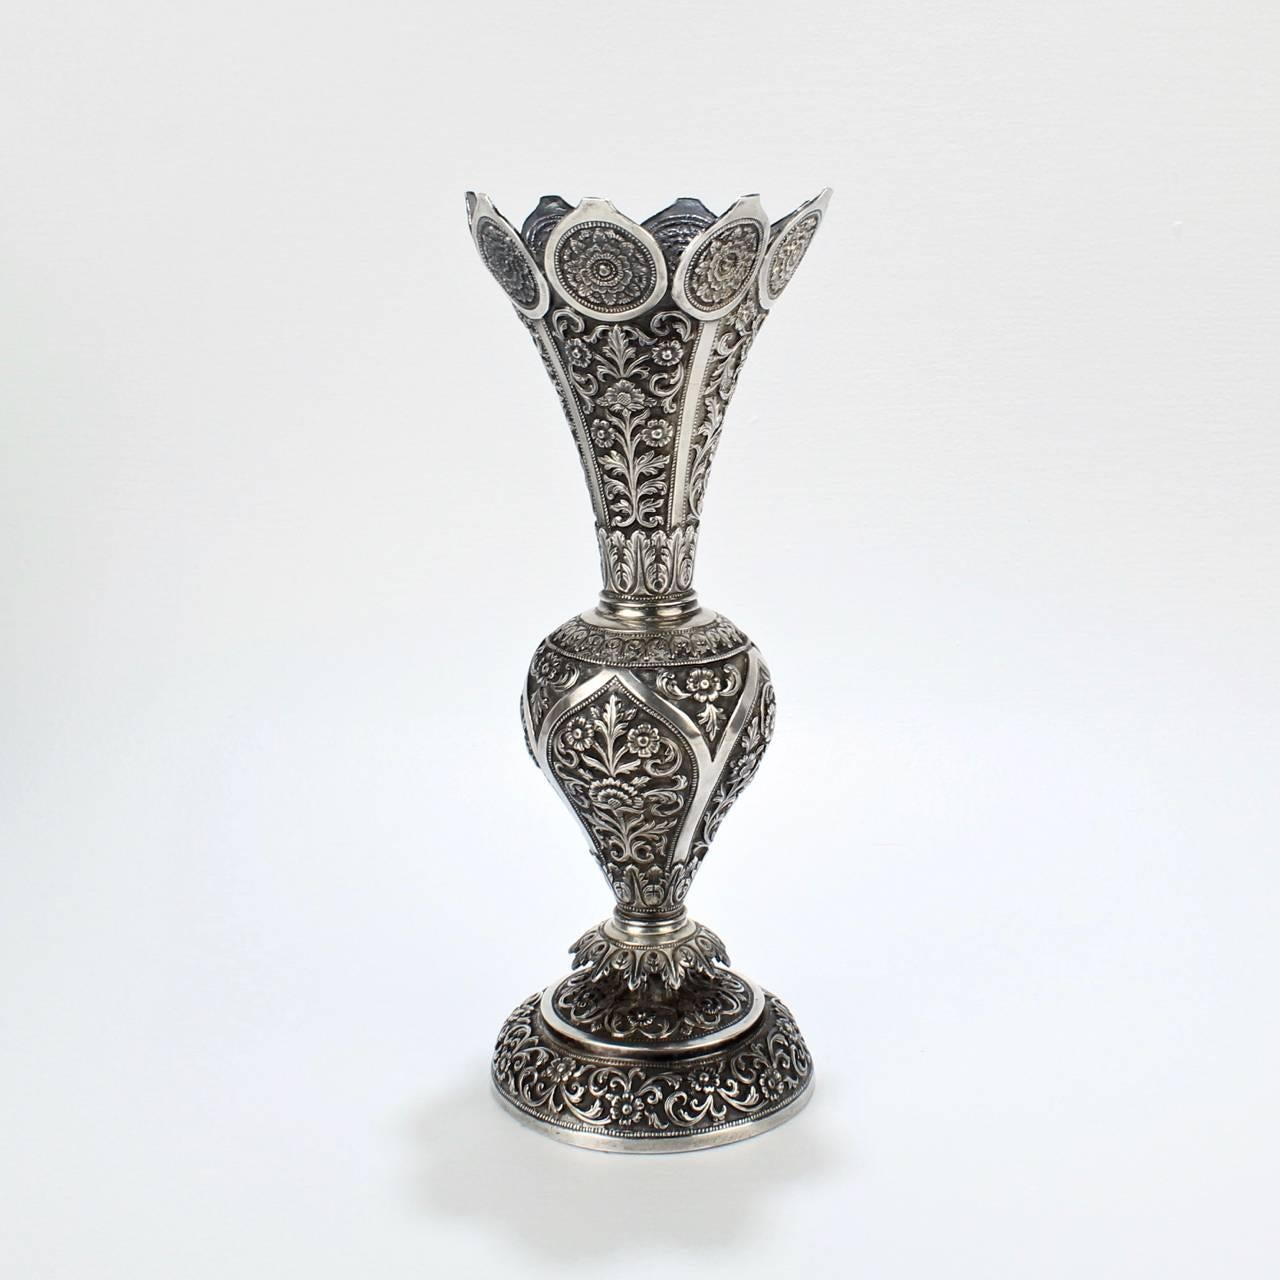 A good antique Kutch silver vase from the famous Oomersi Mawji & Sons workshops.

The workshop was located in Baroda (now Vadodara in the Western state of Gujarat) and was the source of some of the finest 19th and early 20th century silver that